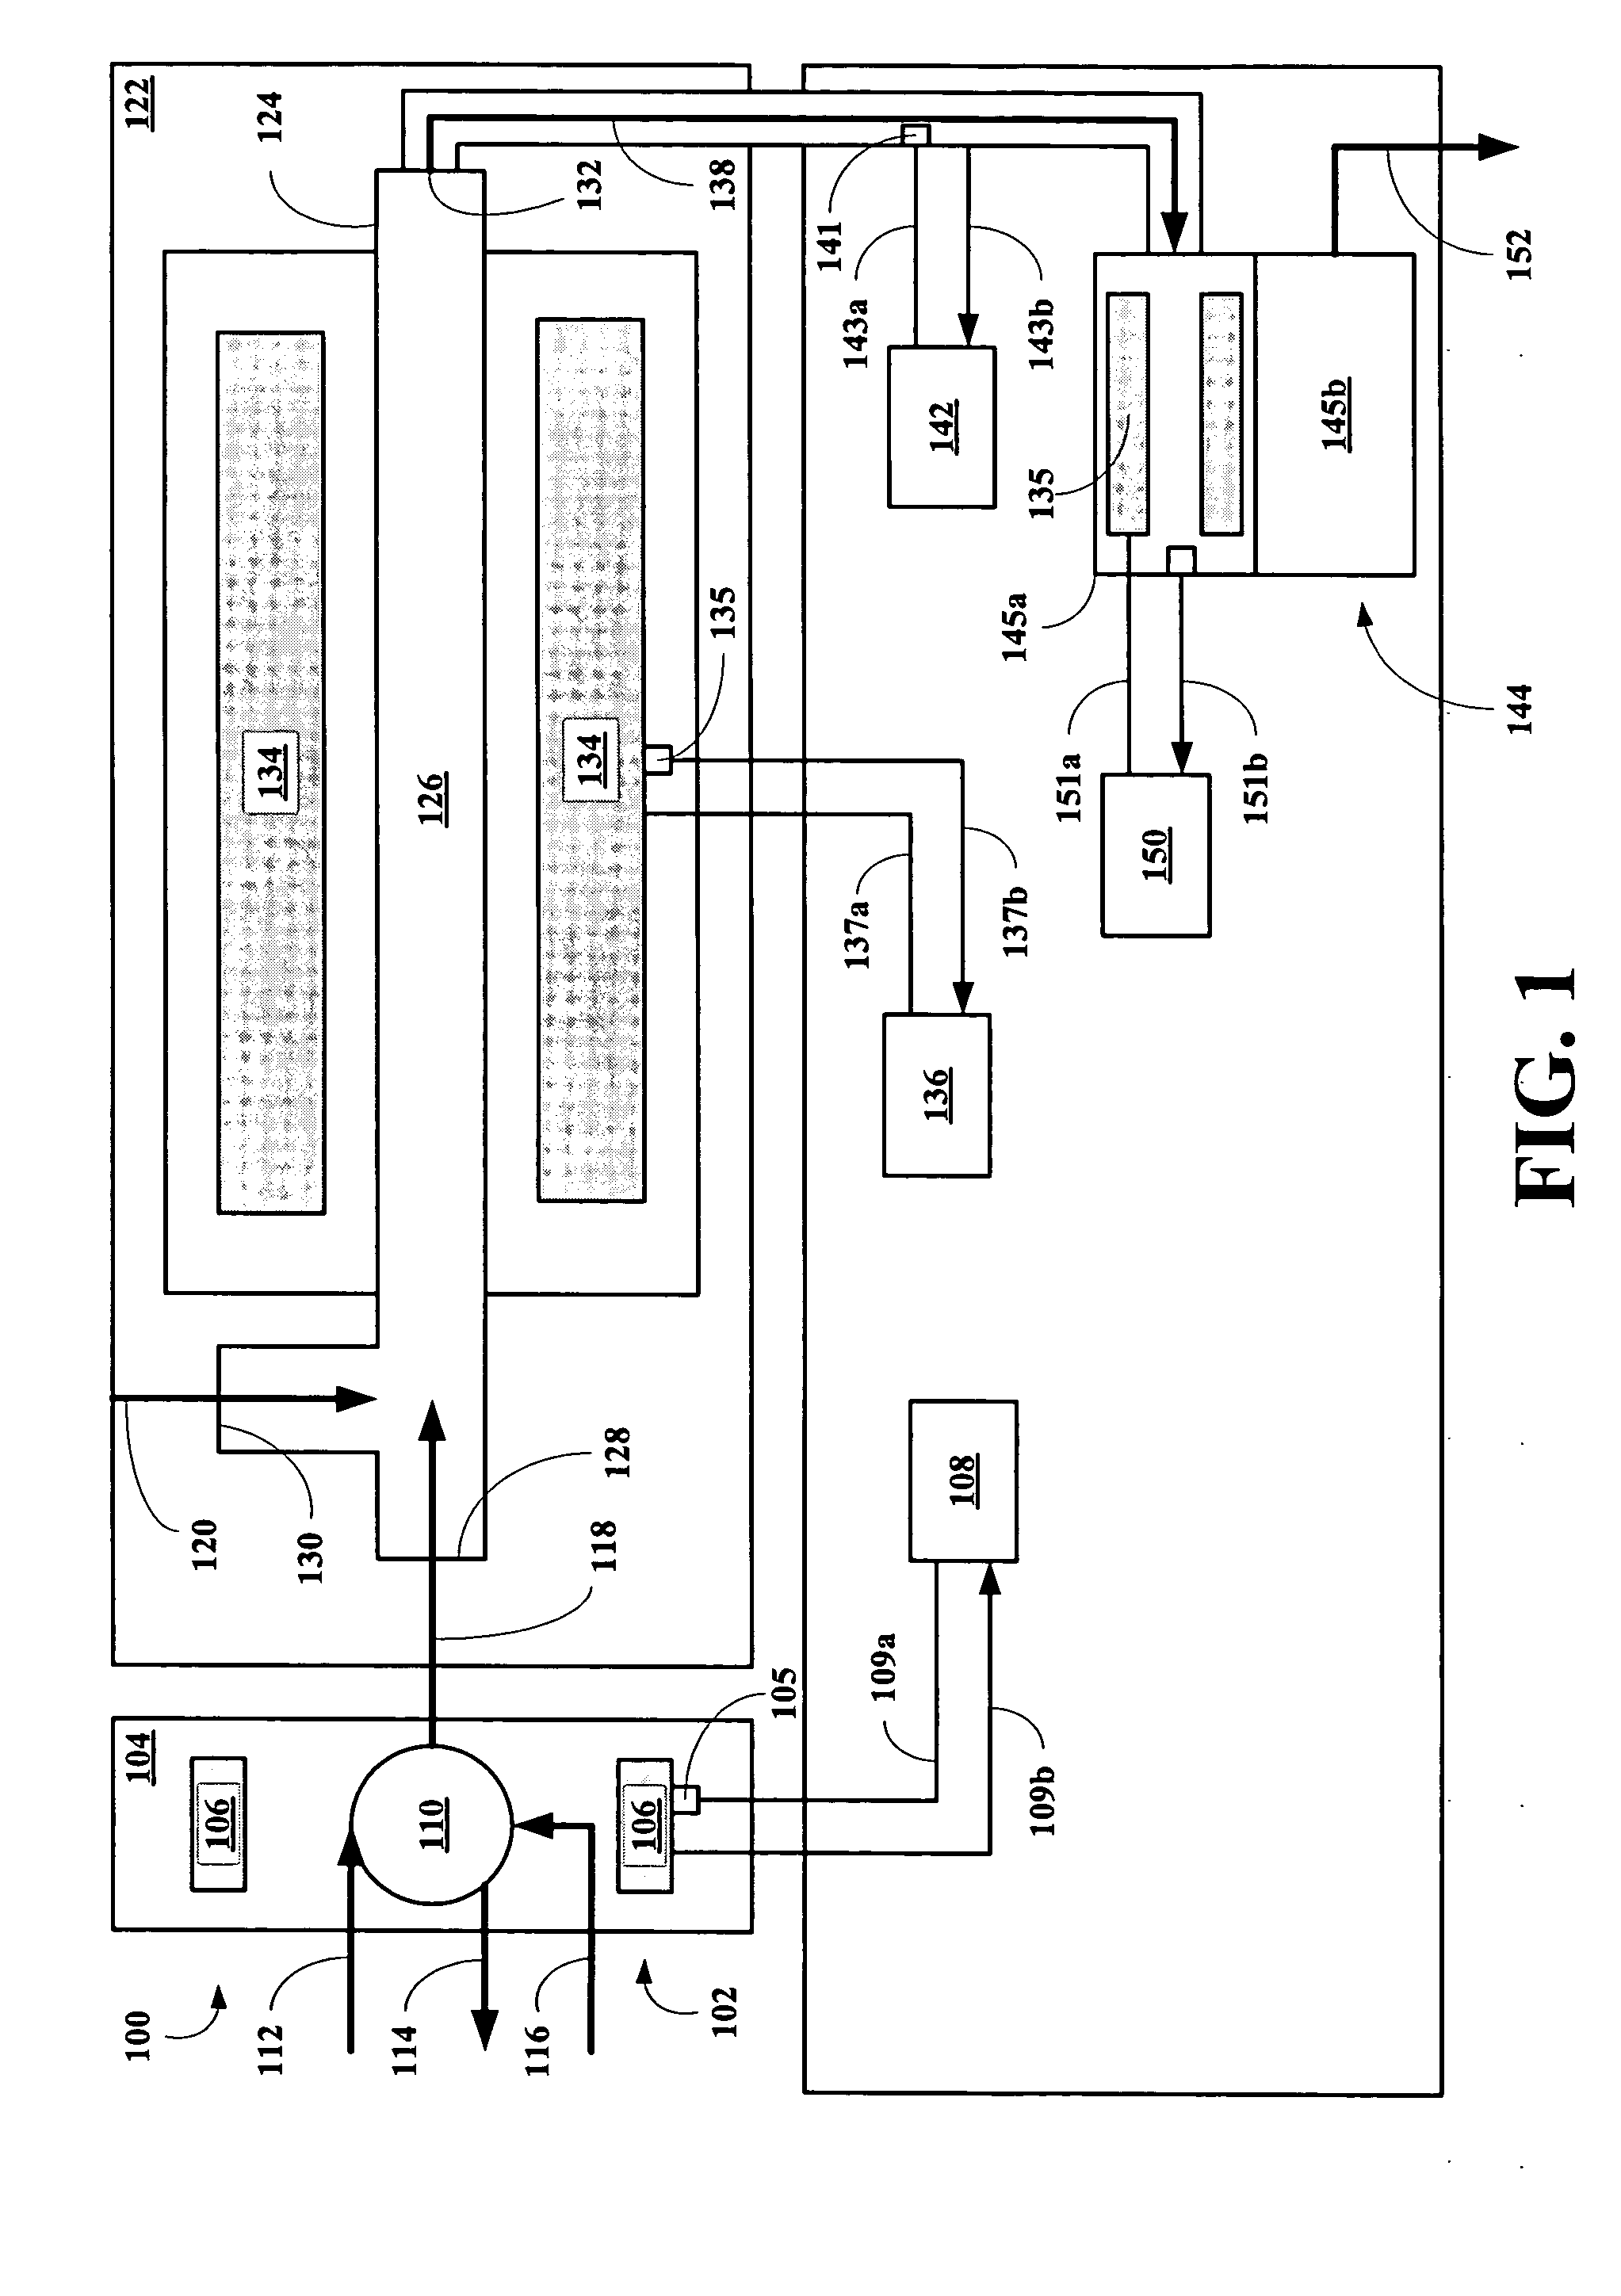 Fast system for detecting detectible combustion products and method for making and using same